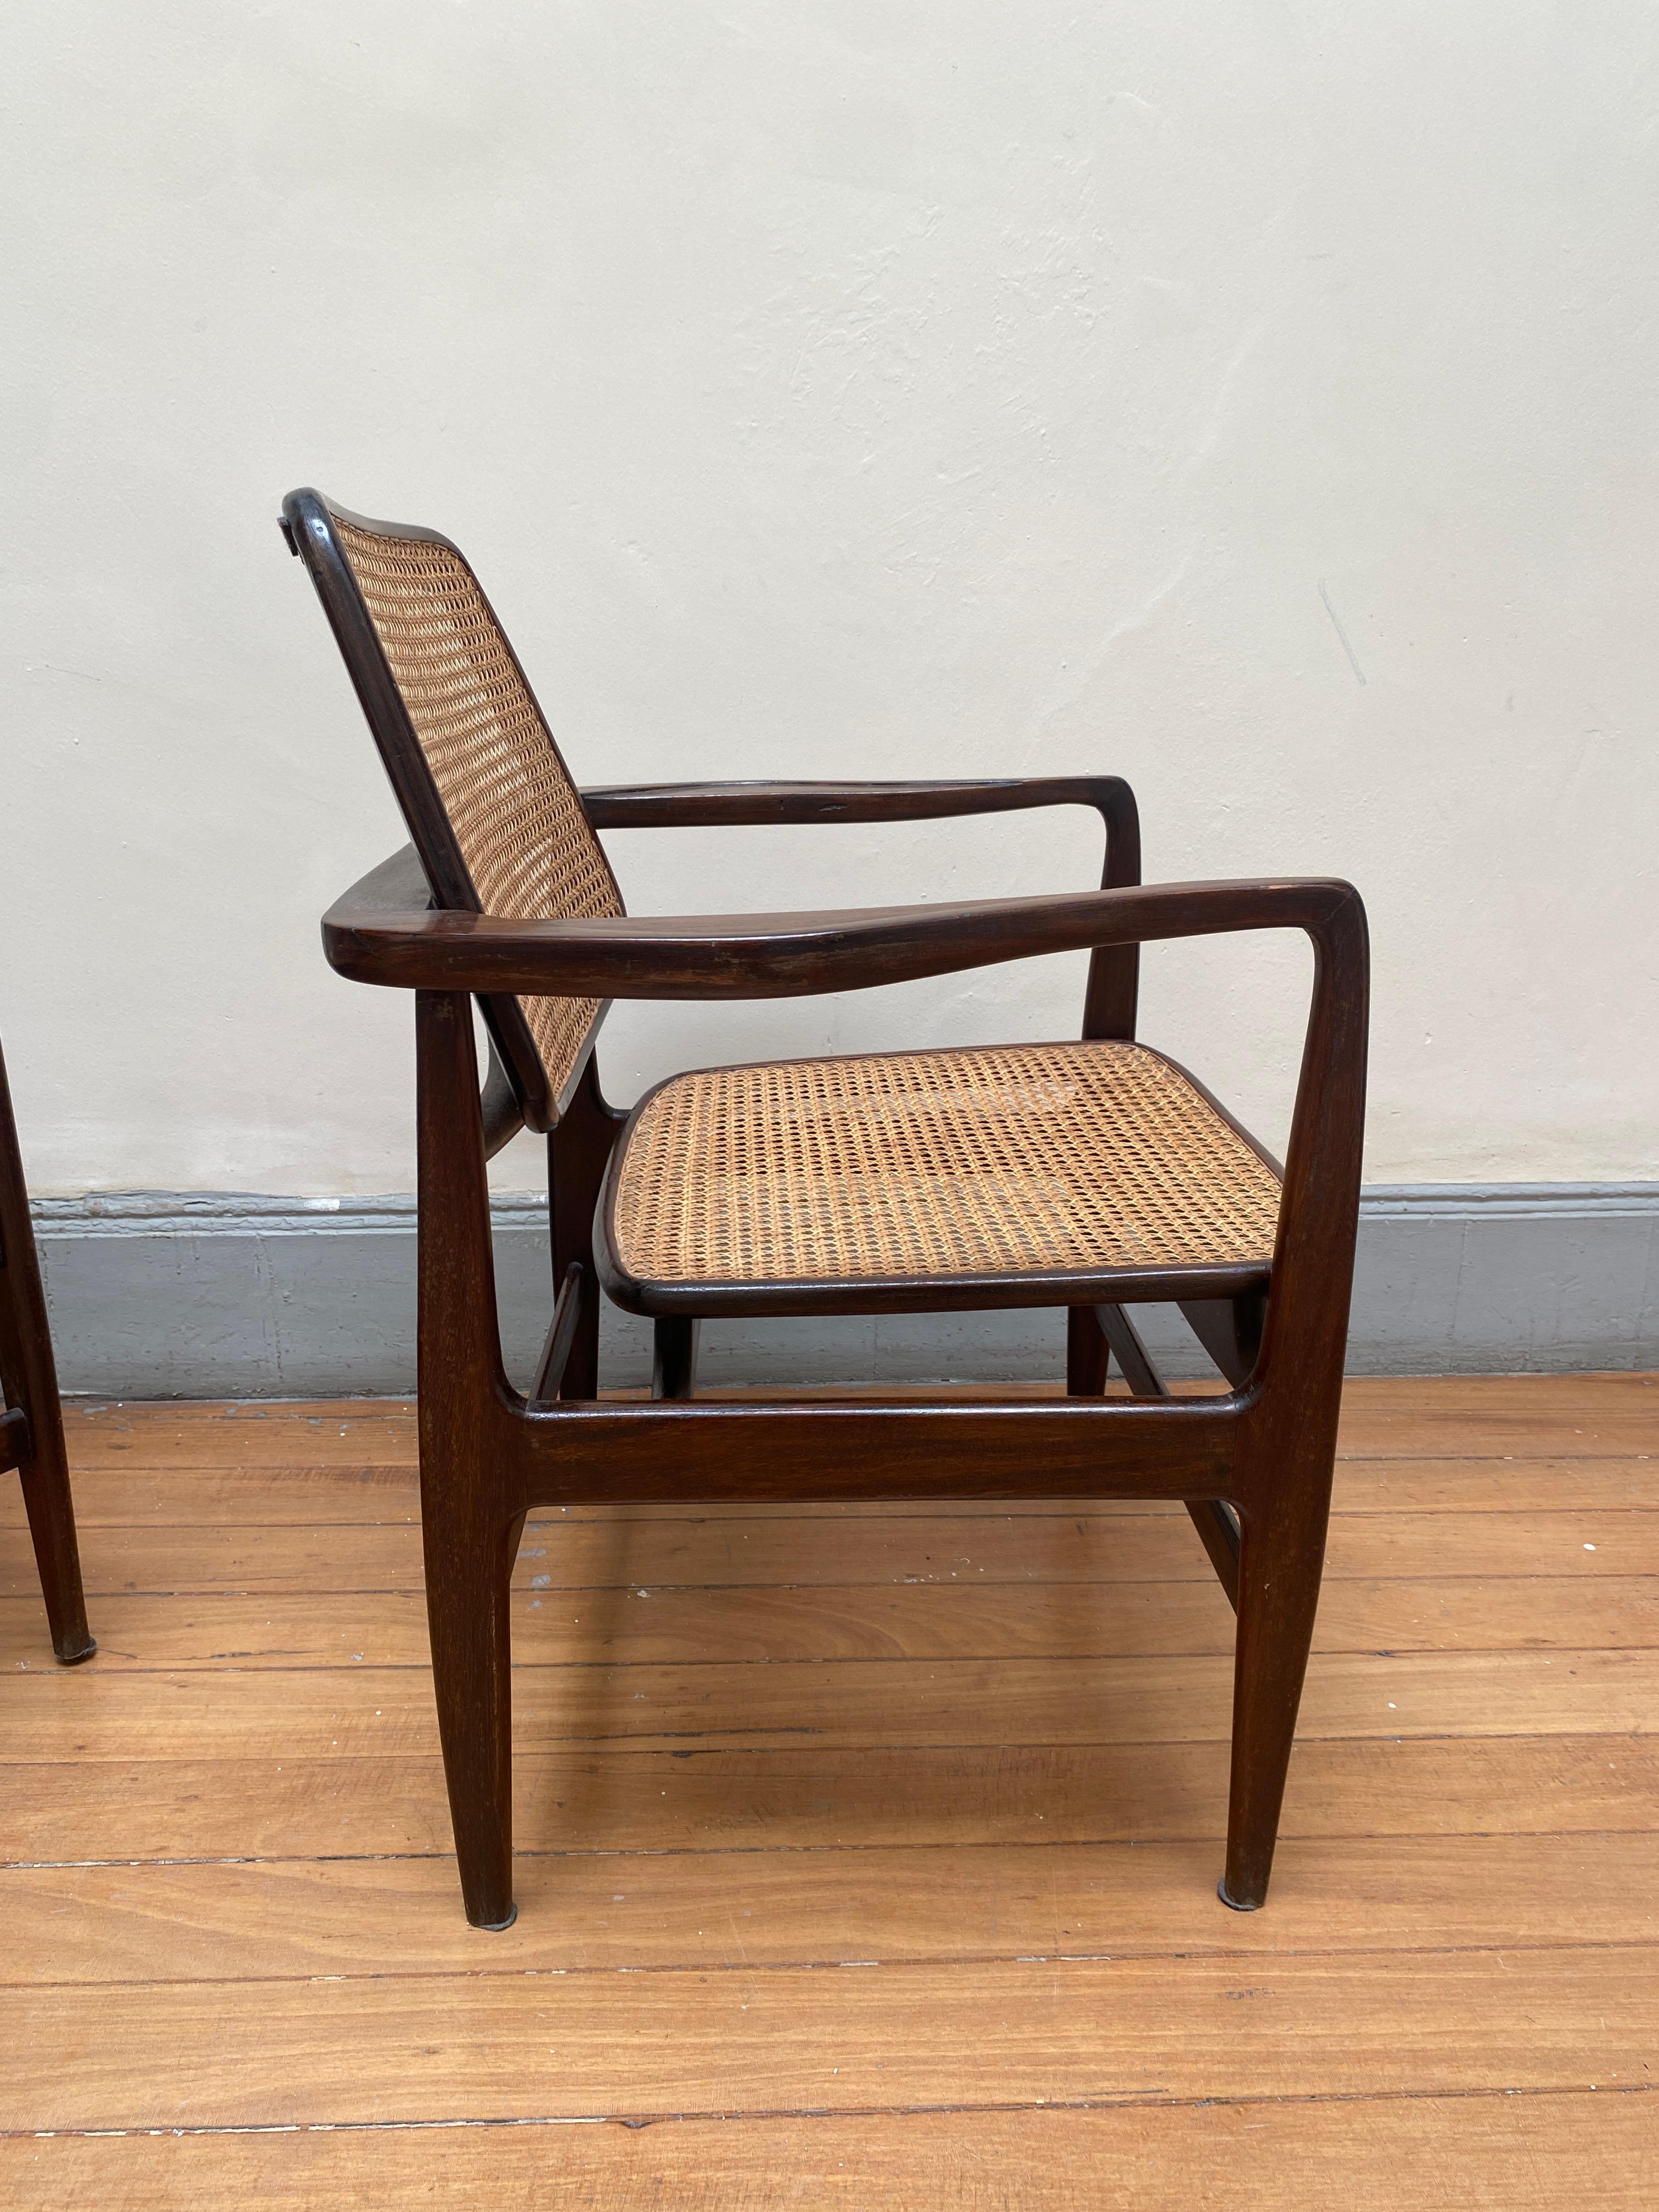 Set of Two Mid-Century Modern Oscar Armchairs by Sergio Rodrigues, Brazil, 1956 For Sale 2